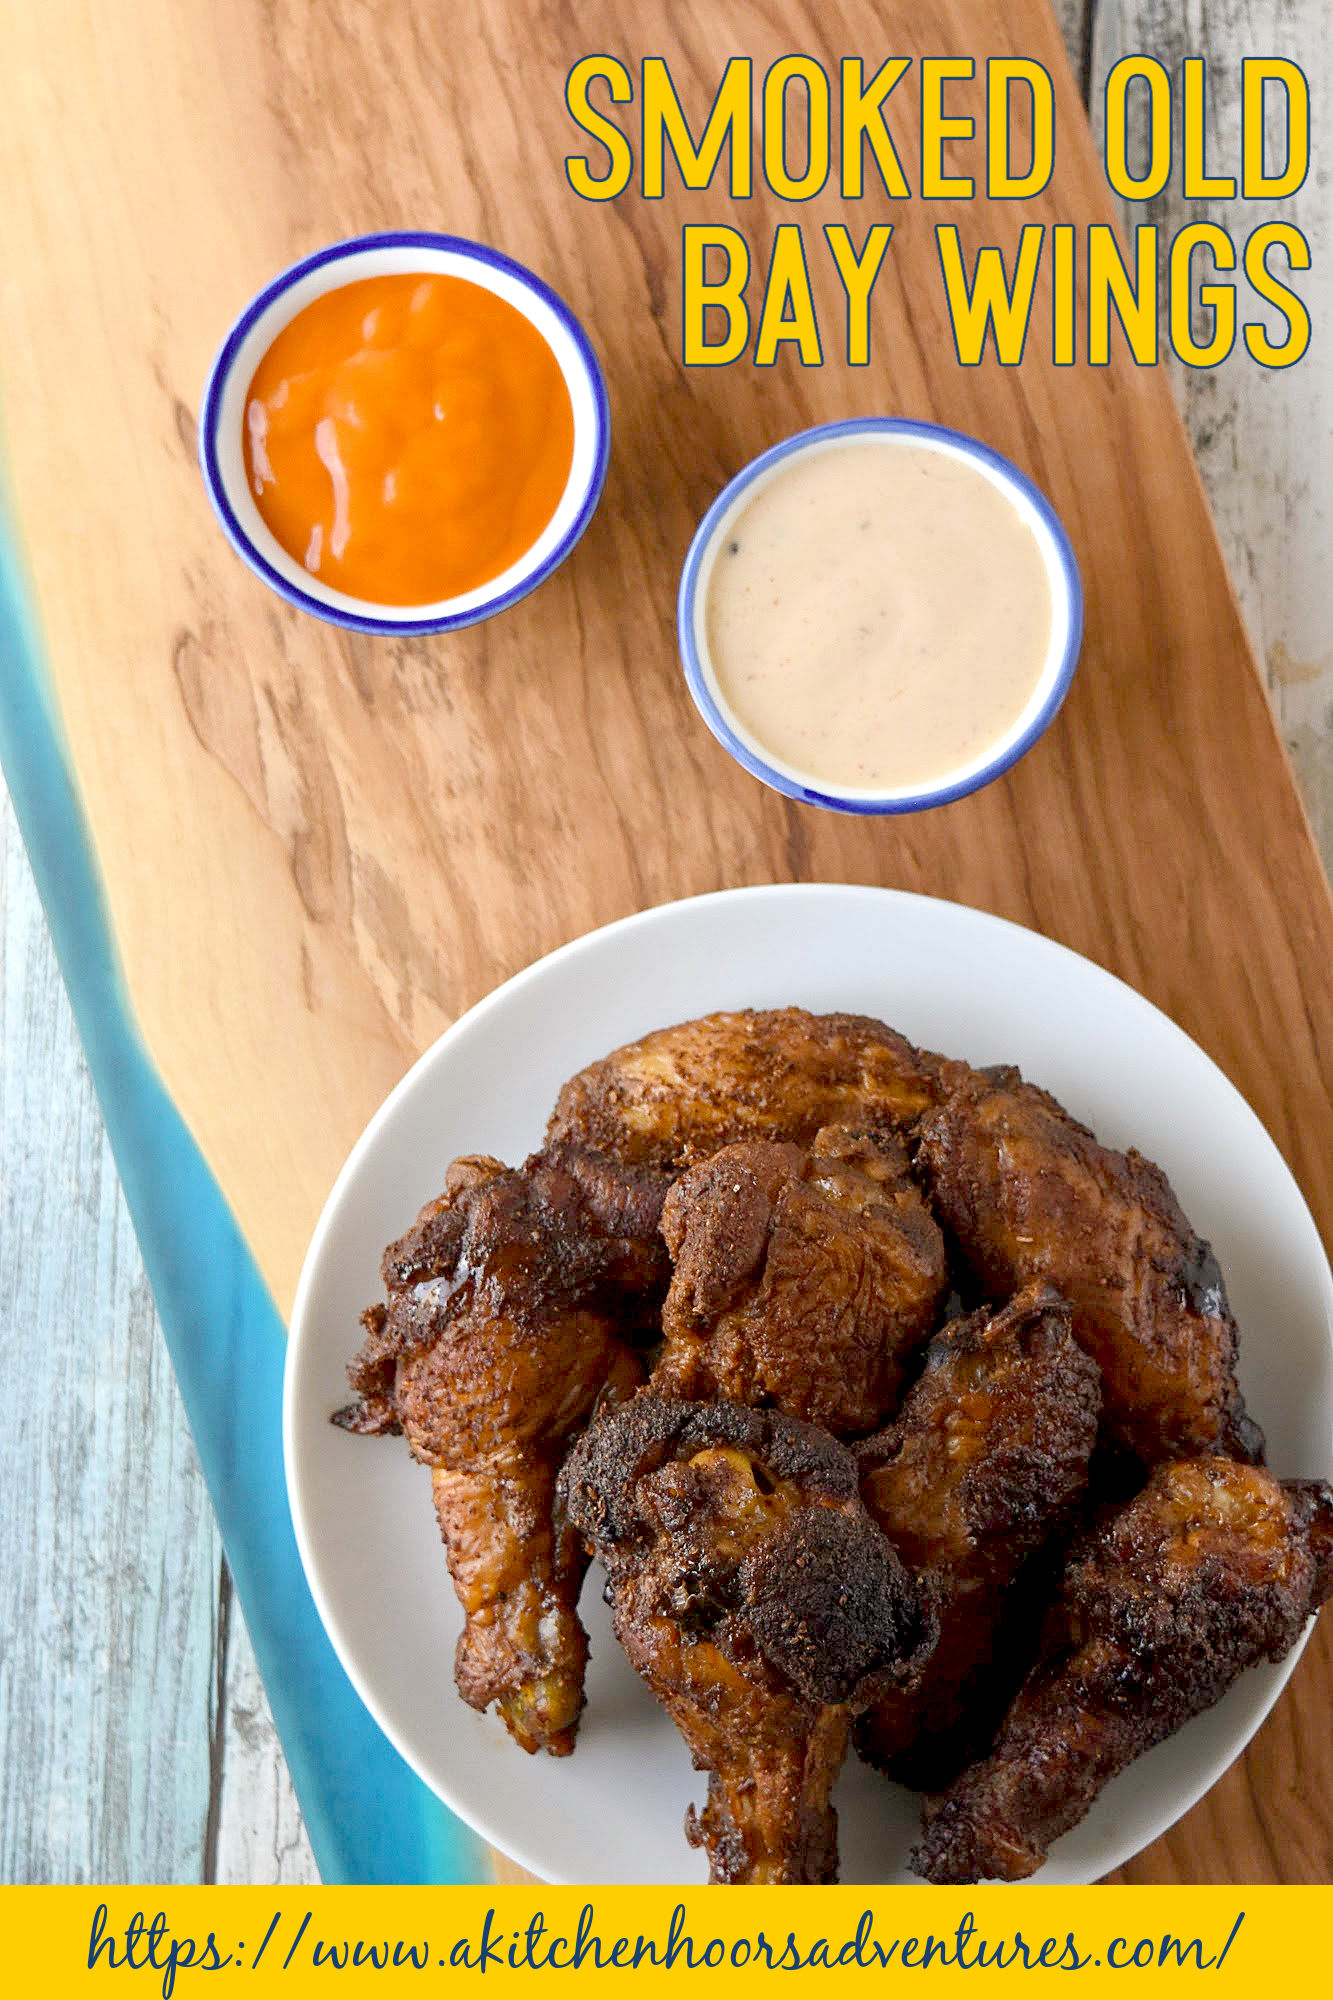 Smoked Old Bay Chicken Wings have a light smoky flavor combined with the Old Bay Lemon Garlic flavored seasoning.  They’re a simply delicious way to celebrate Dad on Father’s Day. #OurFamilyTable